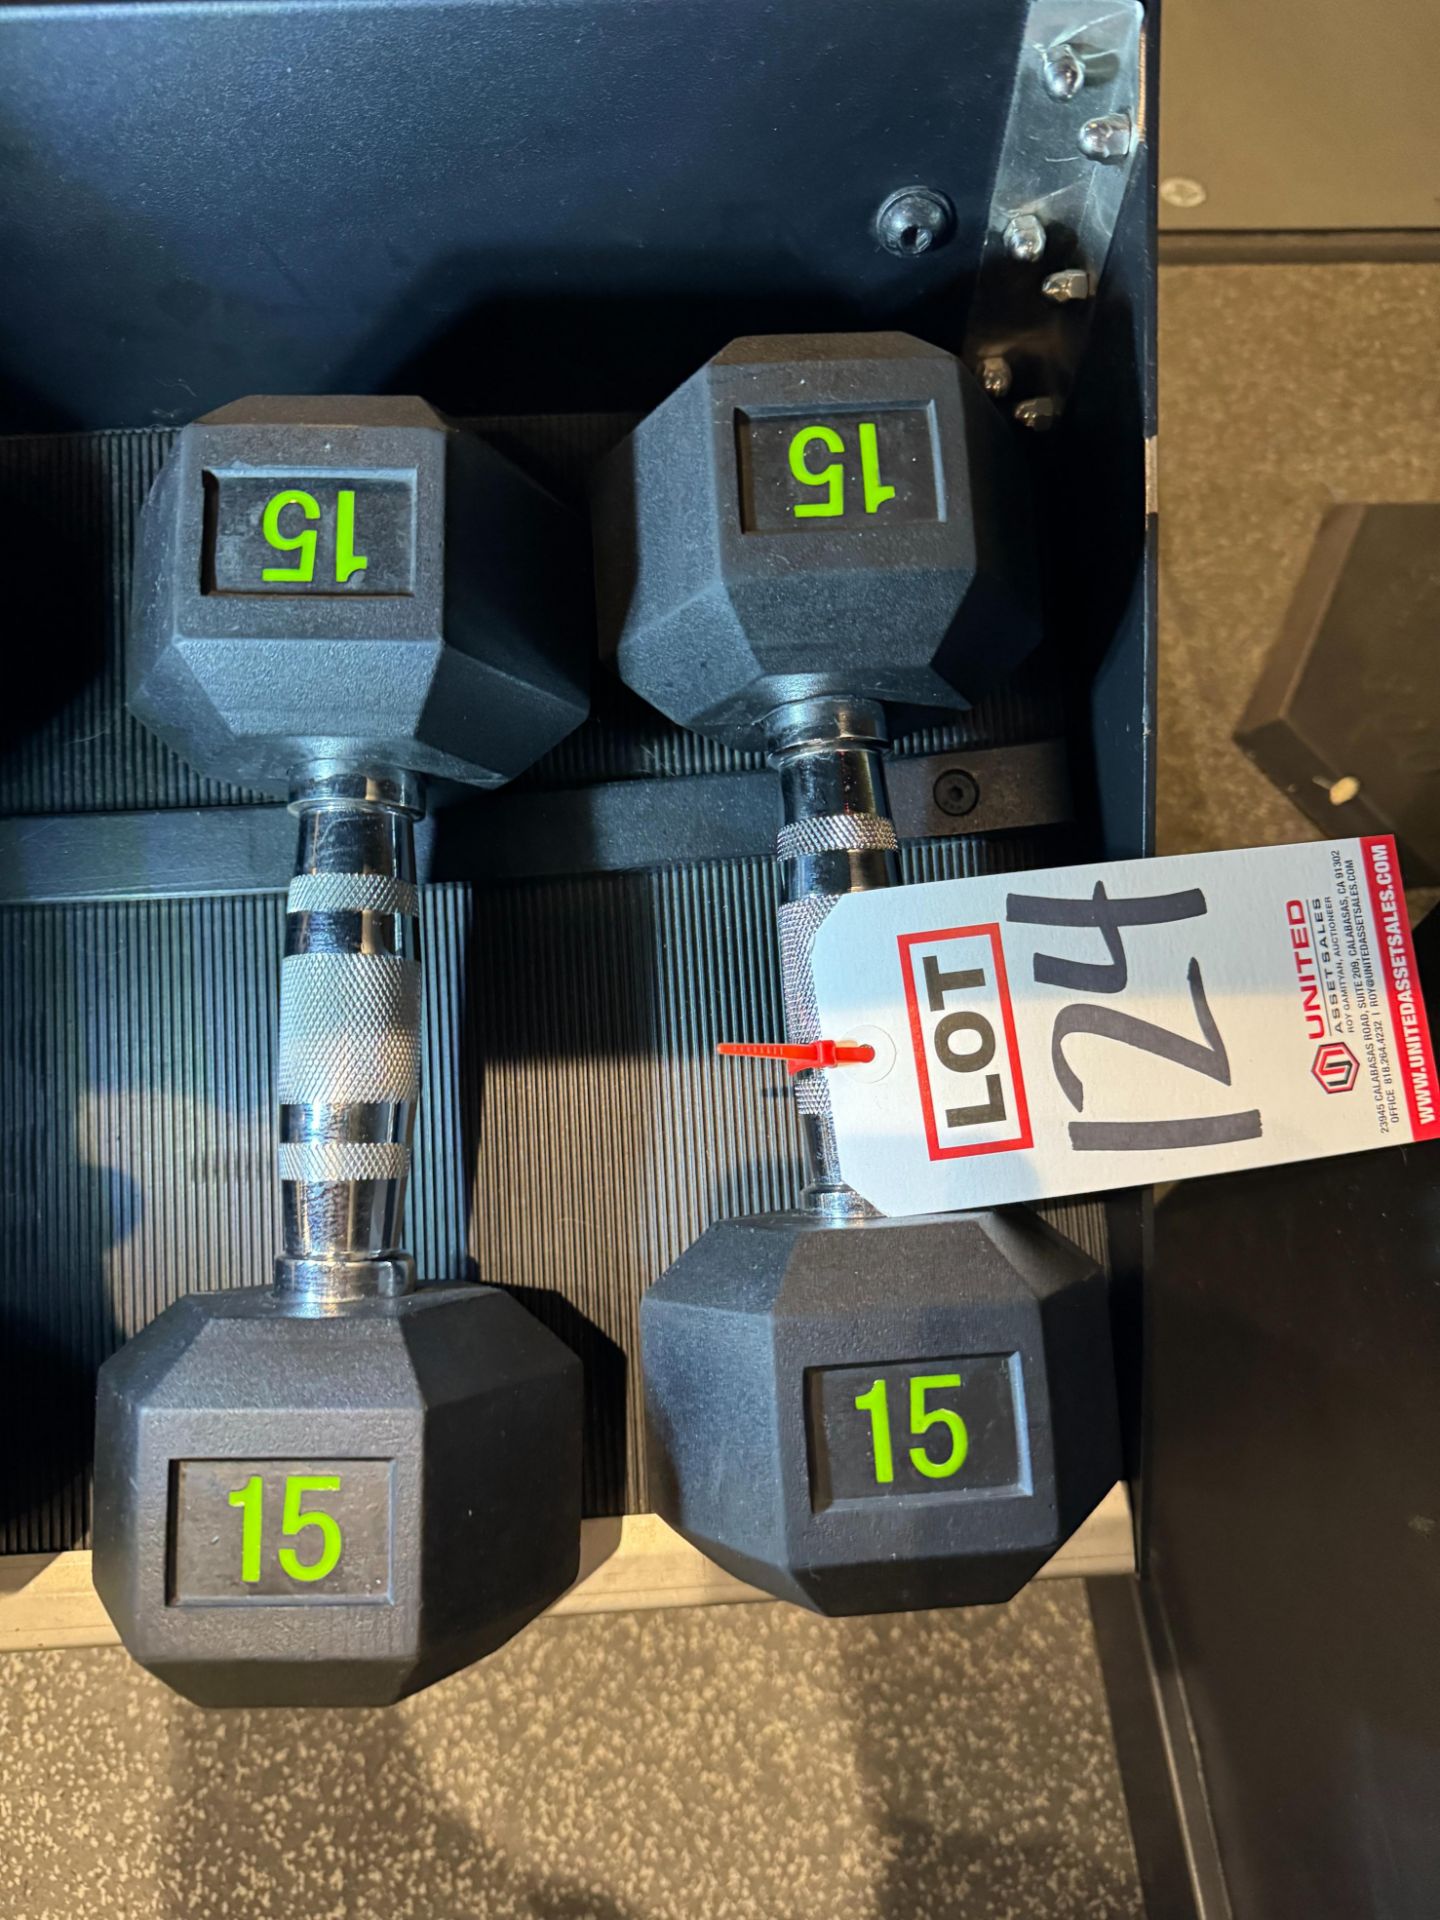 LOT - (2) 15 LB DUMBBELLS, (NOTE: SOLD SUBJECT TO BULK BID FOR ENTIRE FACILITY - SEE LOT 382)